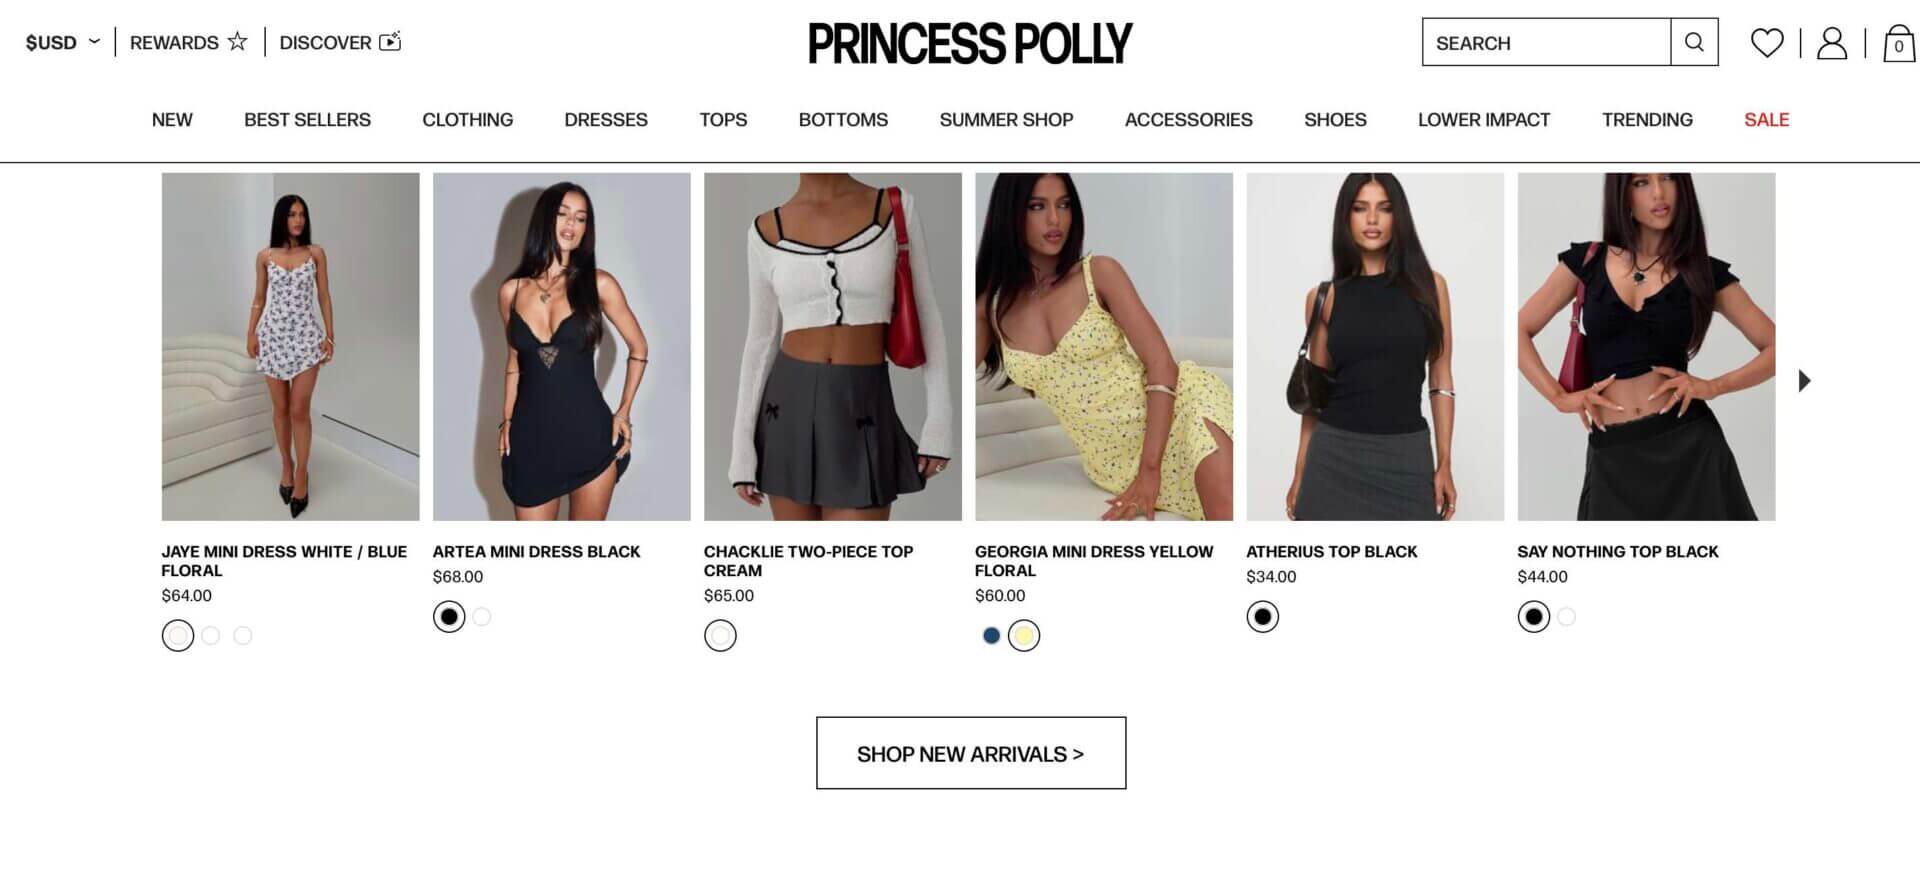 is princess polly fast fashion? Screenshot from their website.